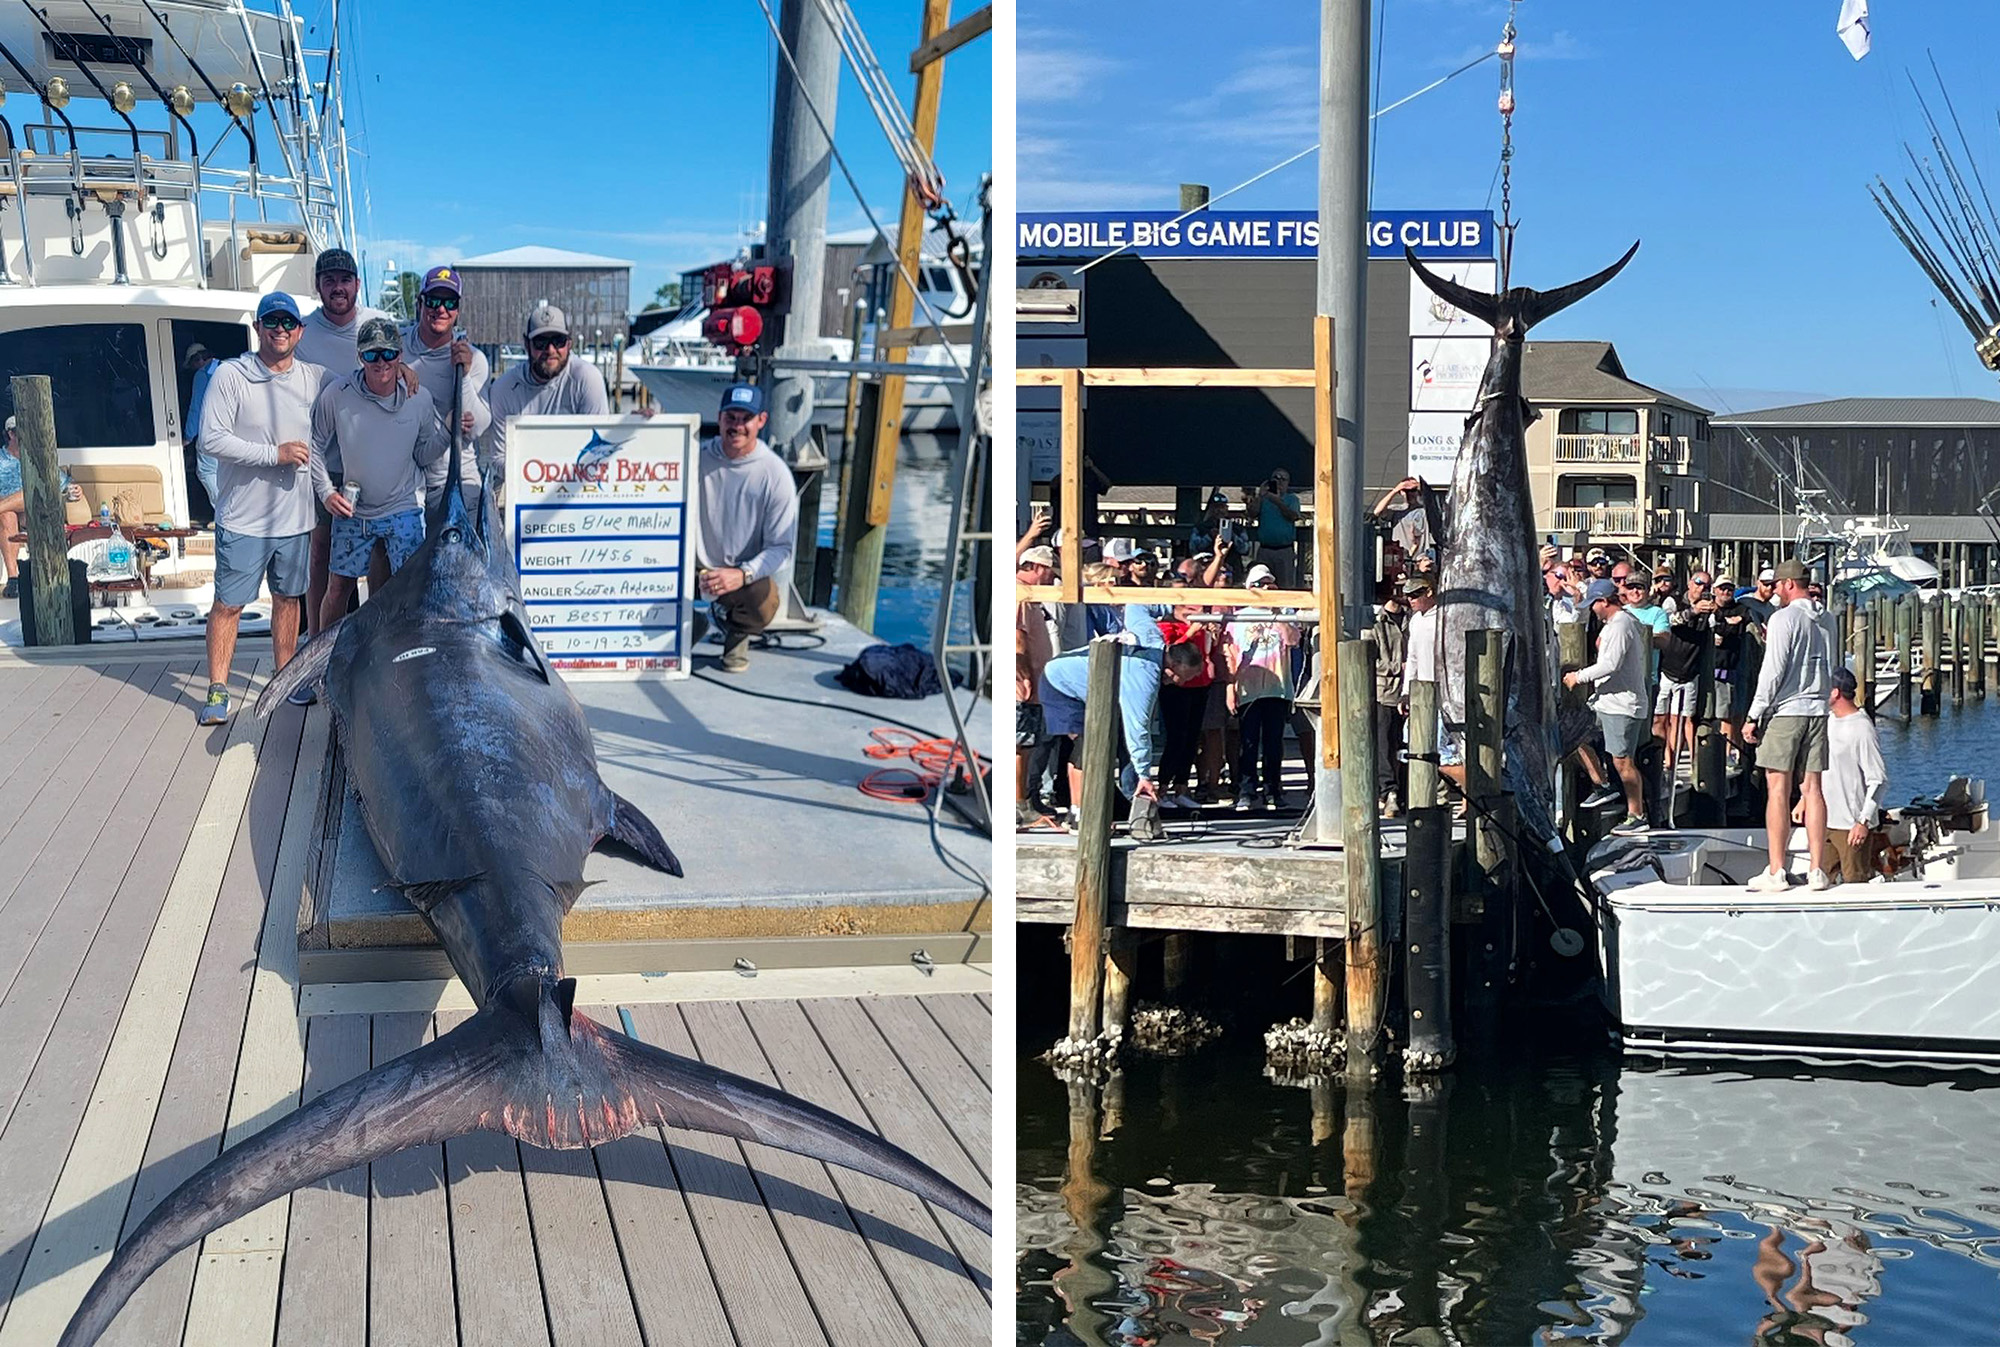 Giant marlin breaks standing state records.